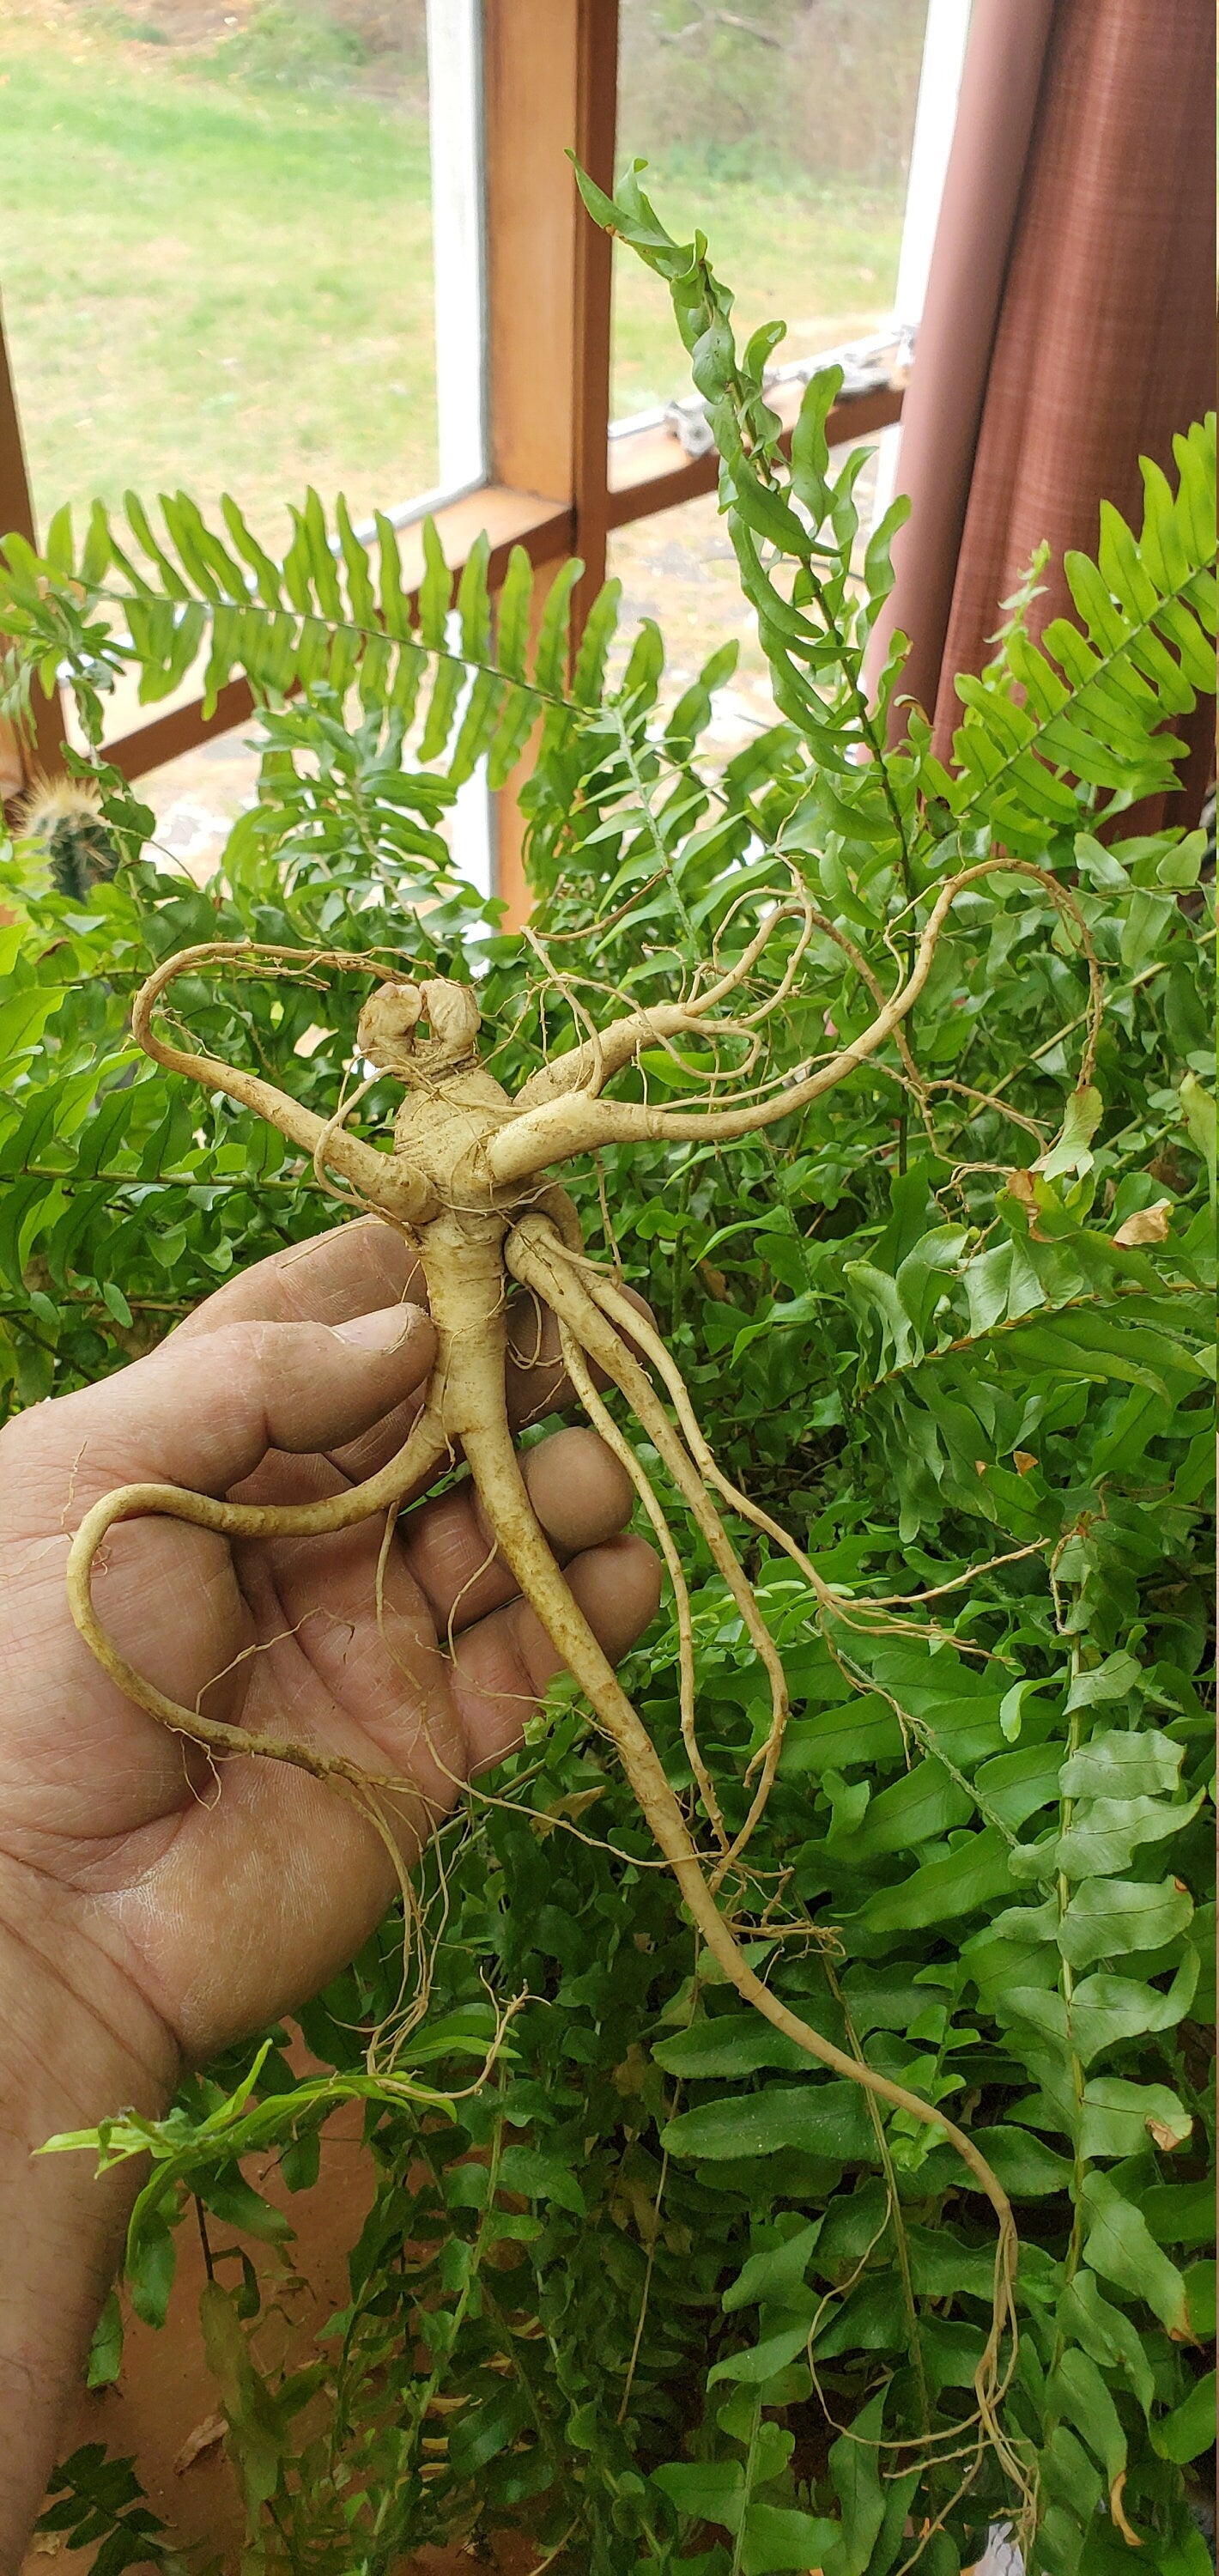 American Ginseng Roots (Panax quinquefolius), Dormant 3 year old